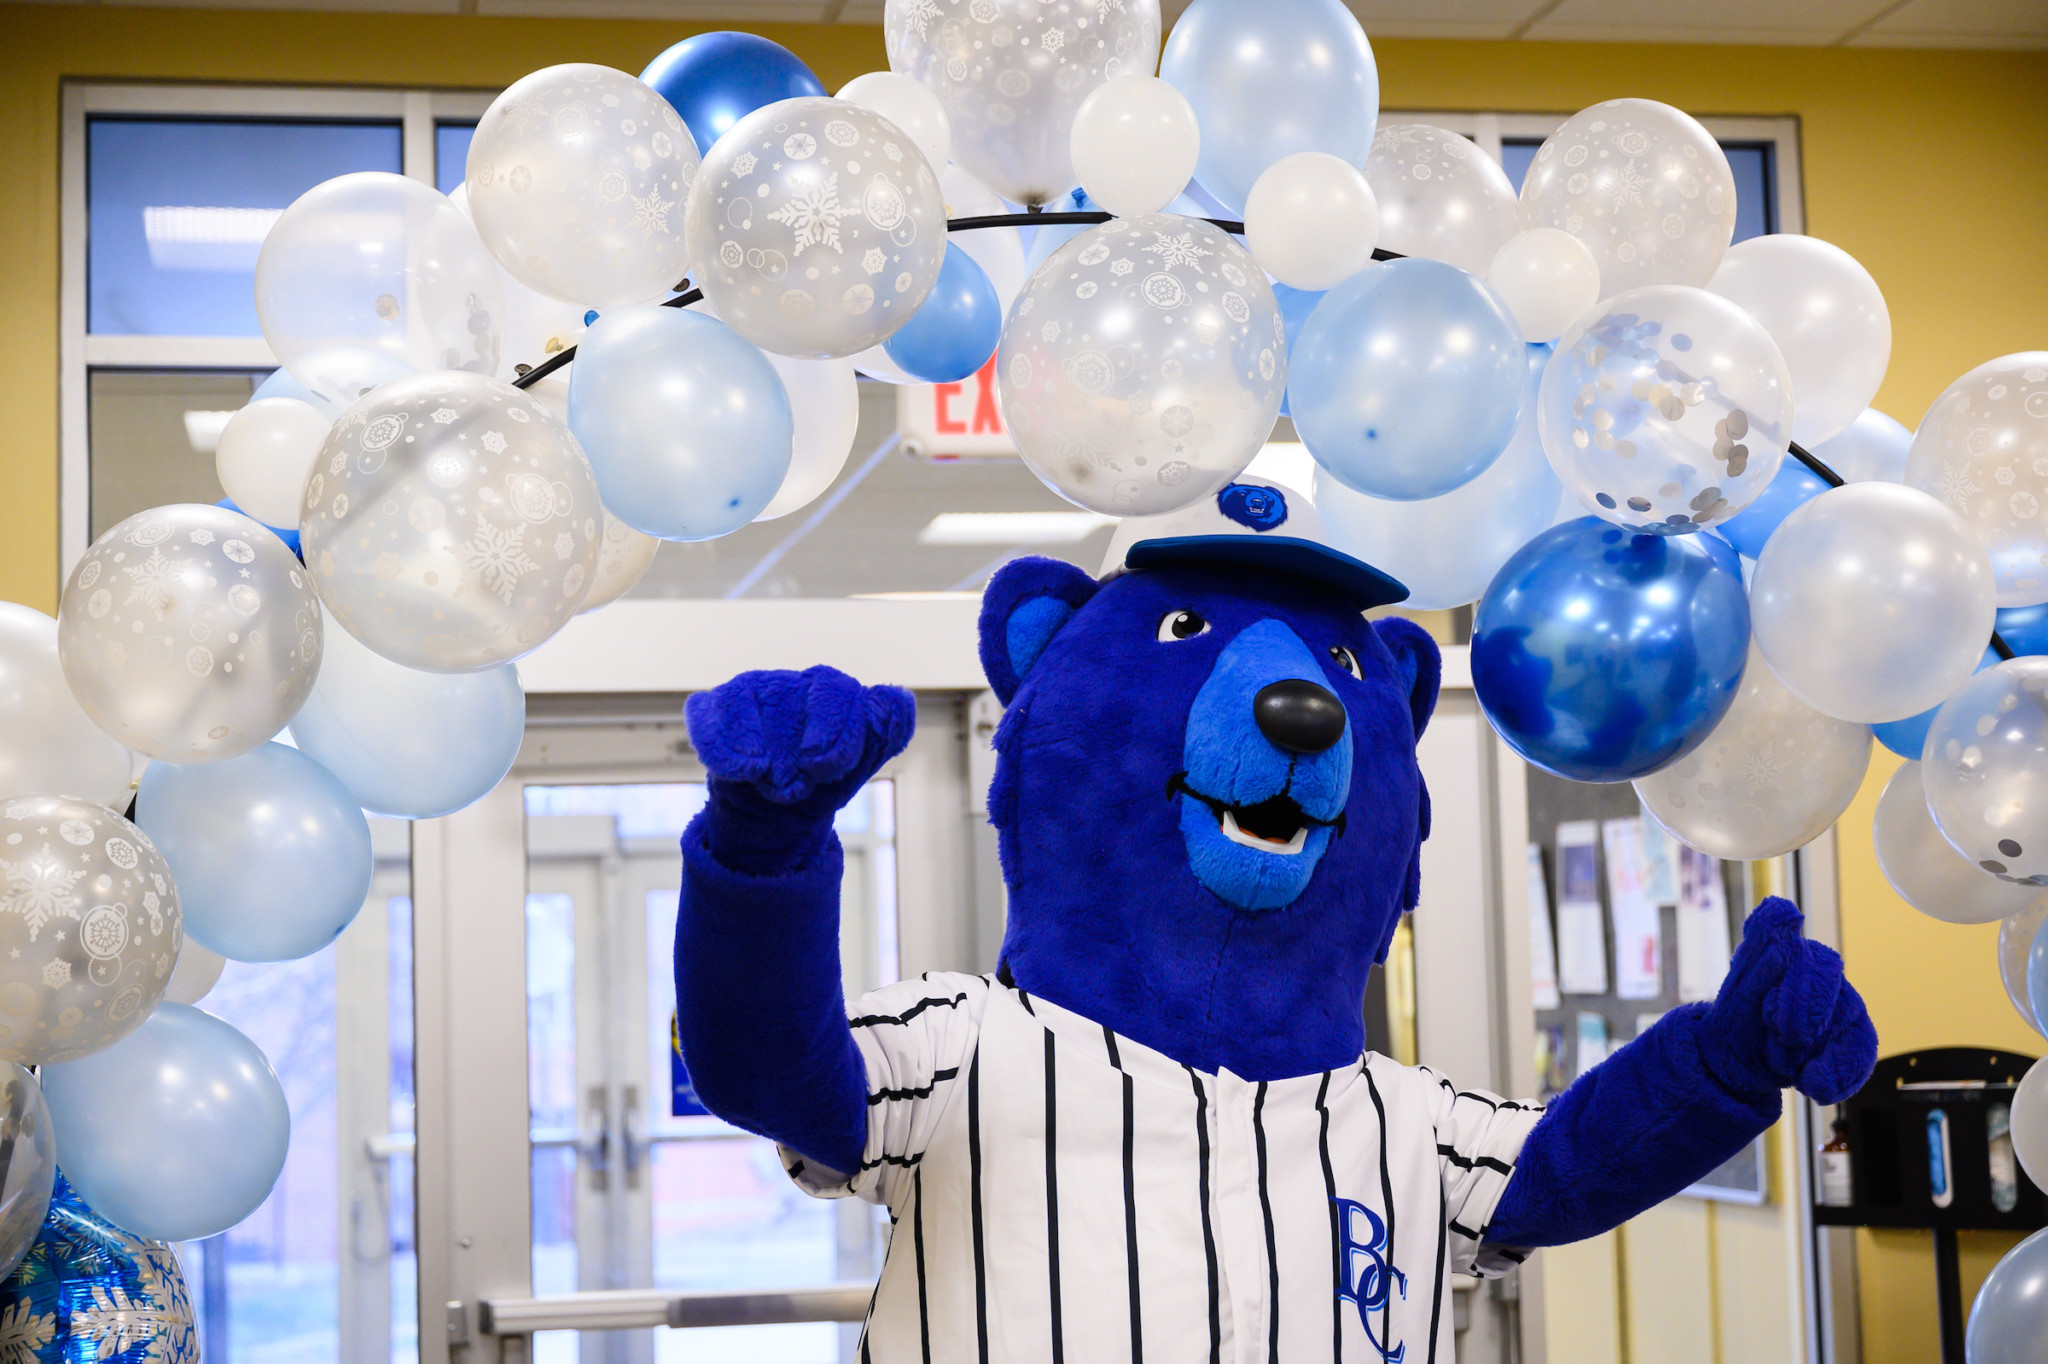 Berea's mascot, Blue the Mountaineer, is excited to congratulate you on your acceptance!